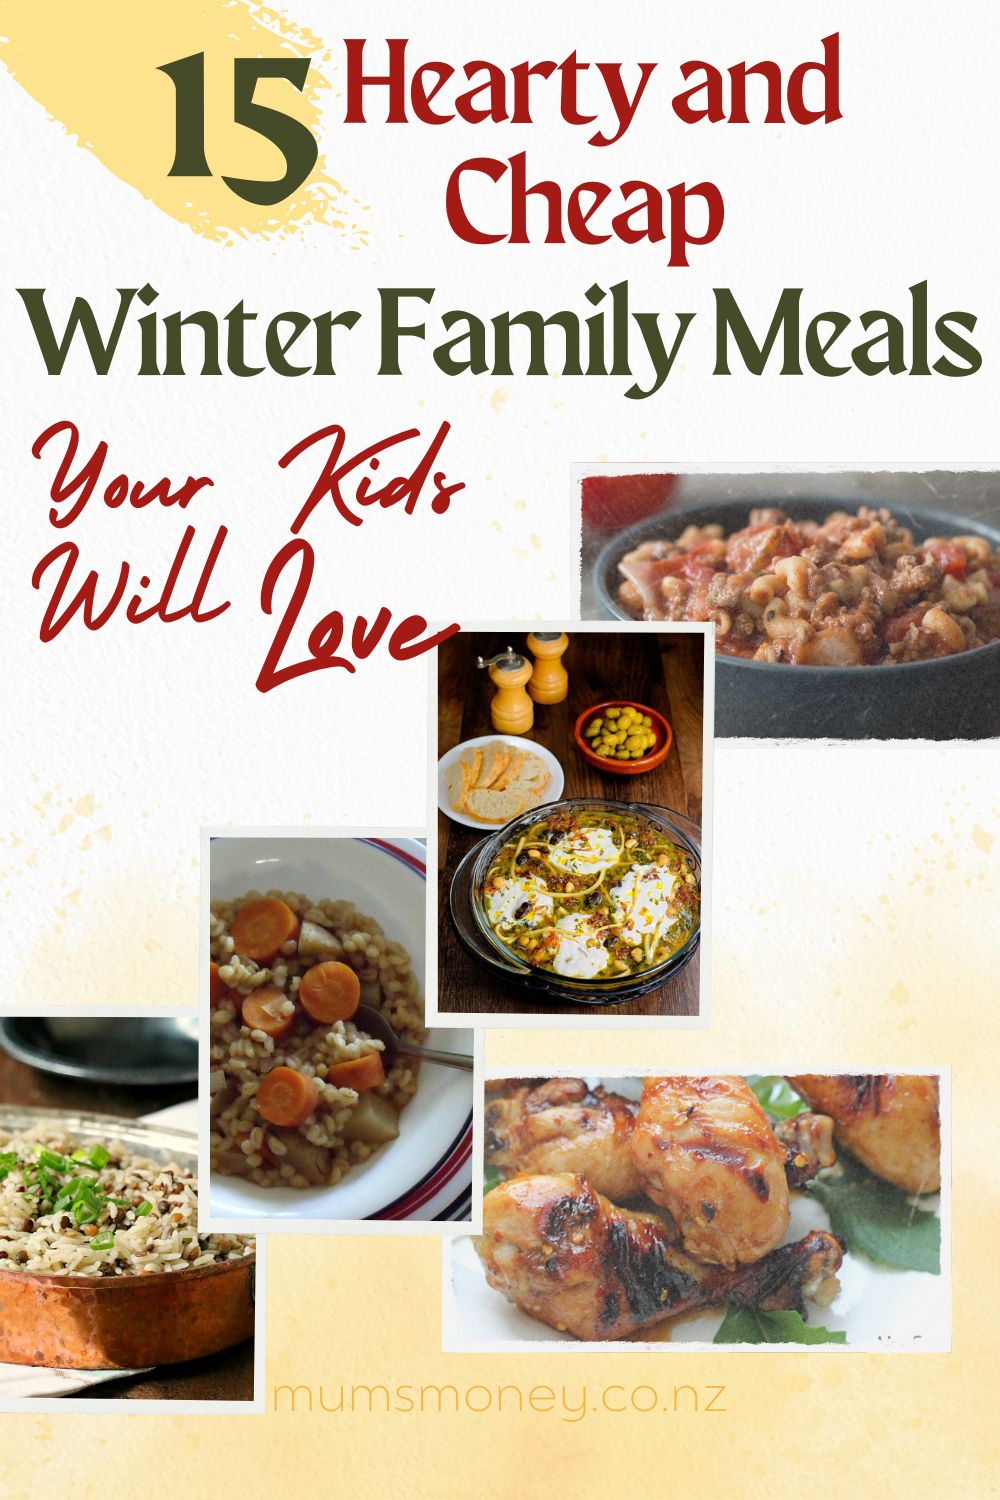  Hearty and Cheap Winter Family Meals Pin Image